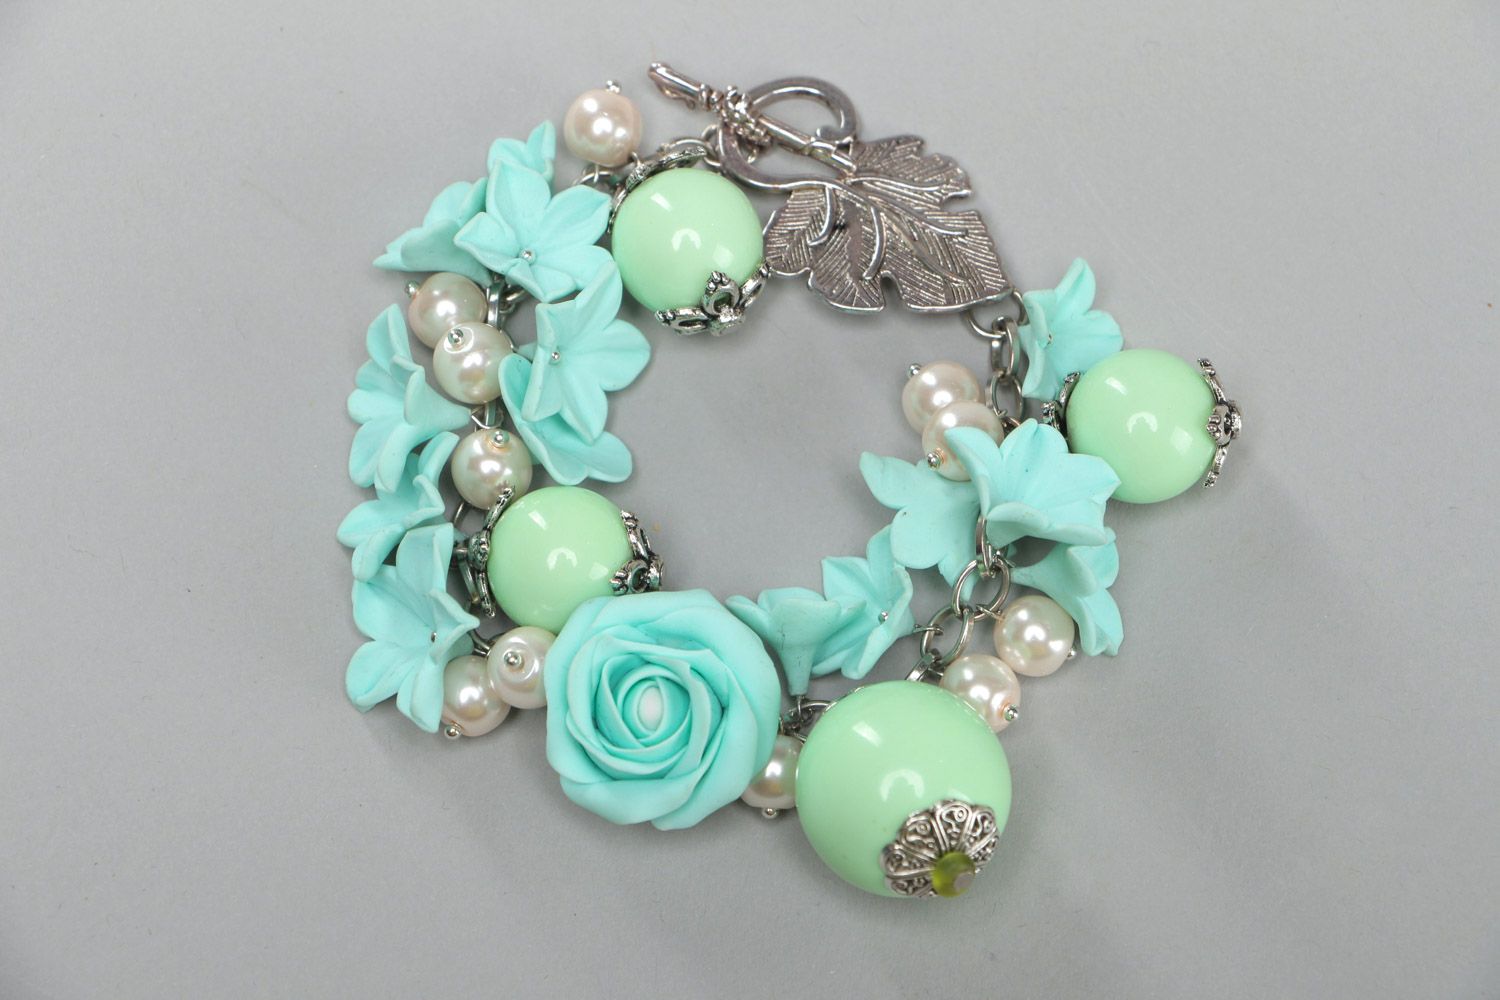 Handmade beautiful designer flower bracelet with charms made of polymer clay in mint color photo 1